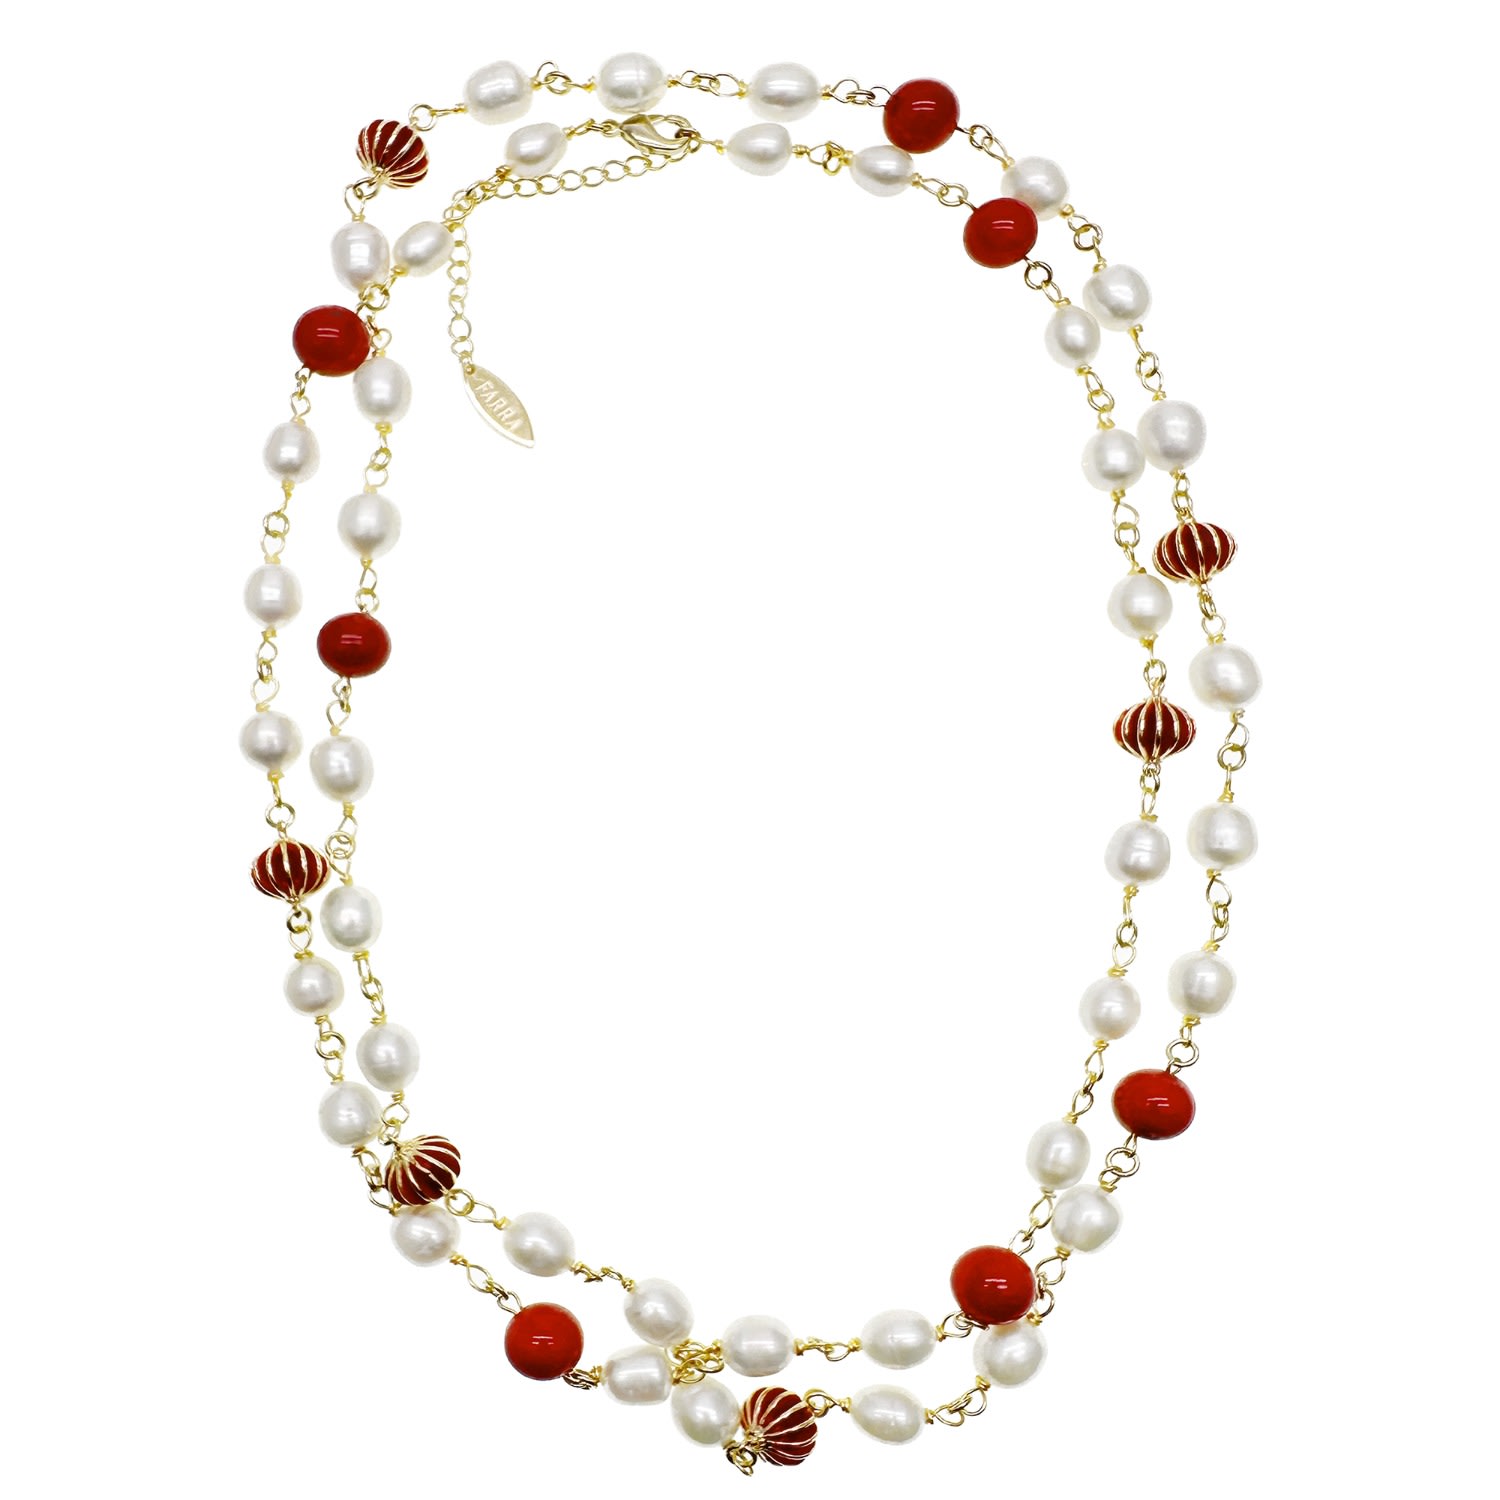 Women’s Red Coral And Freshwater Pearls With Chinese Lantern Station Necklace Farra